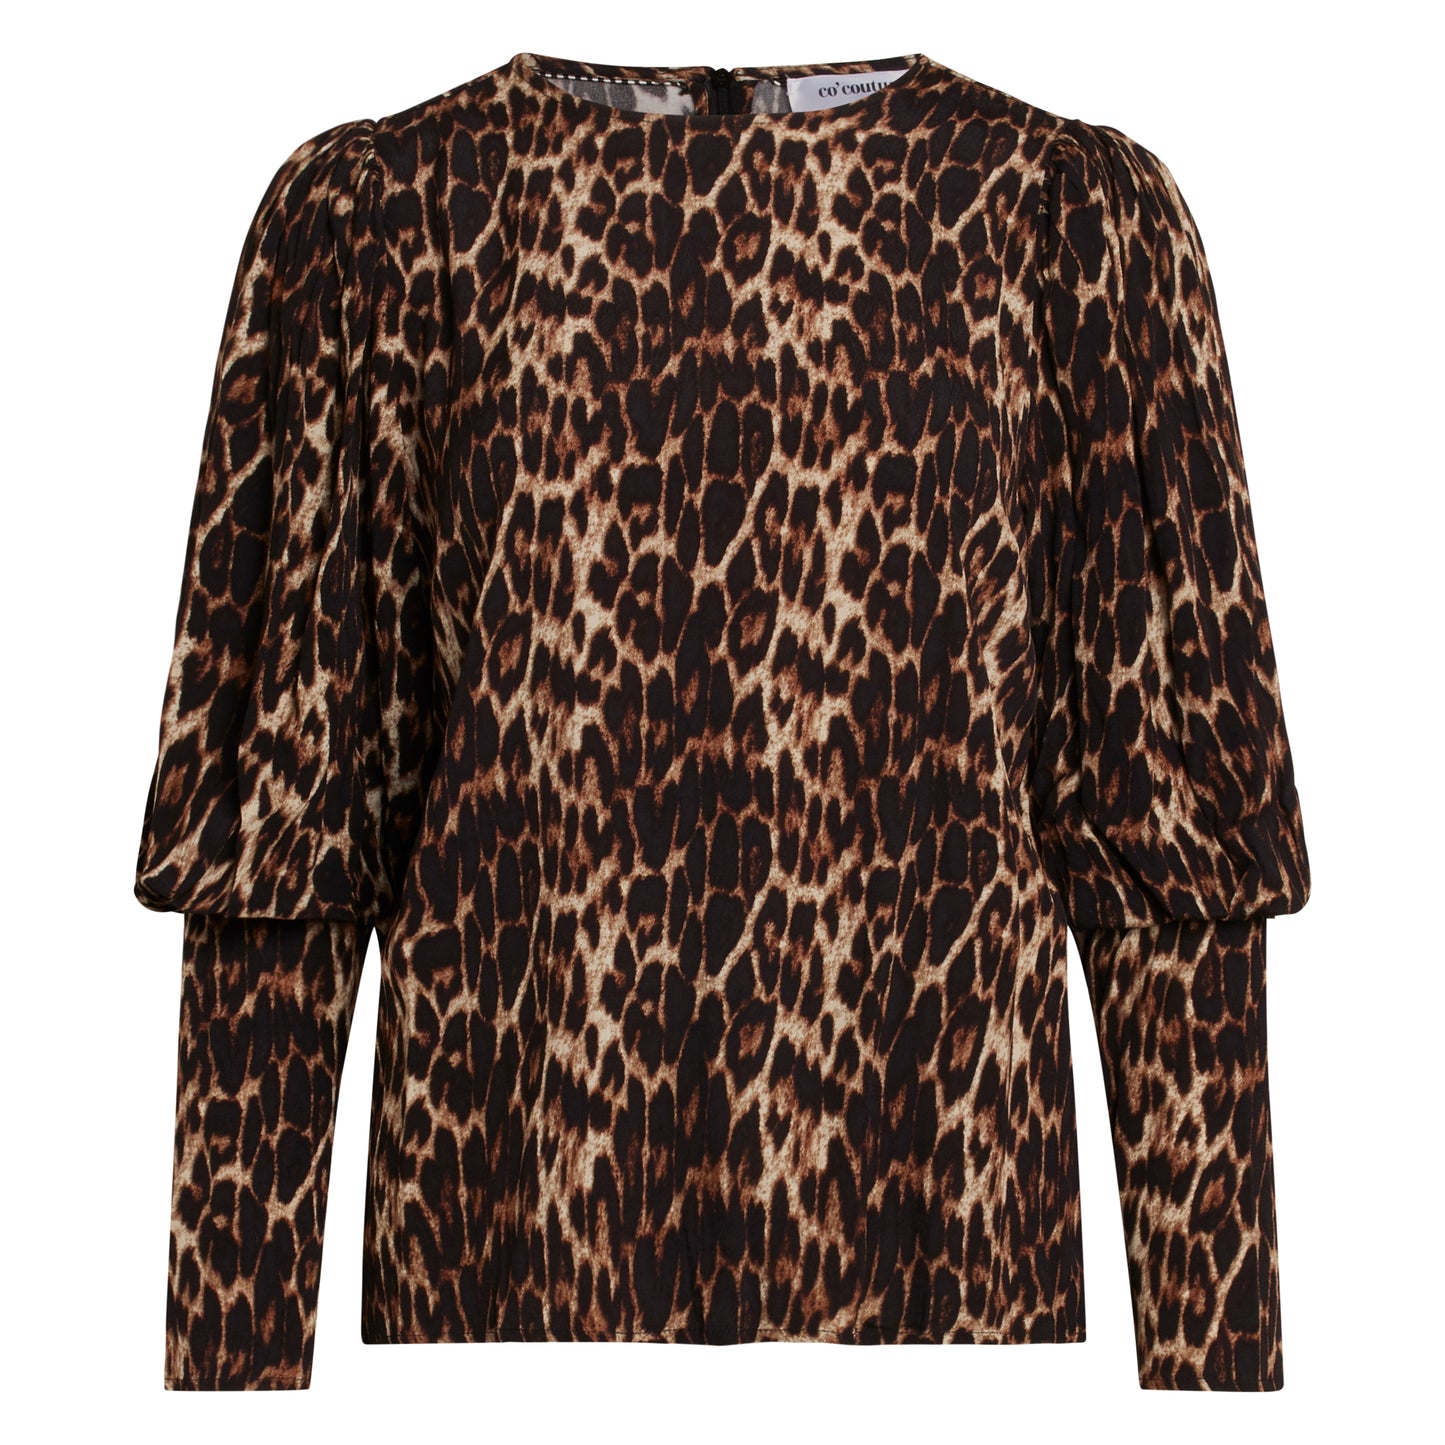 Co'couture - Nabia Blouse - Leopard